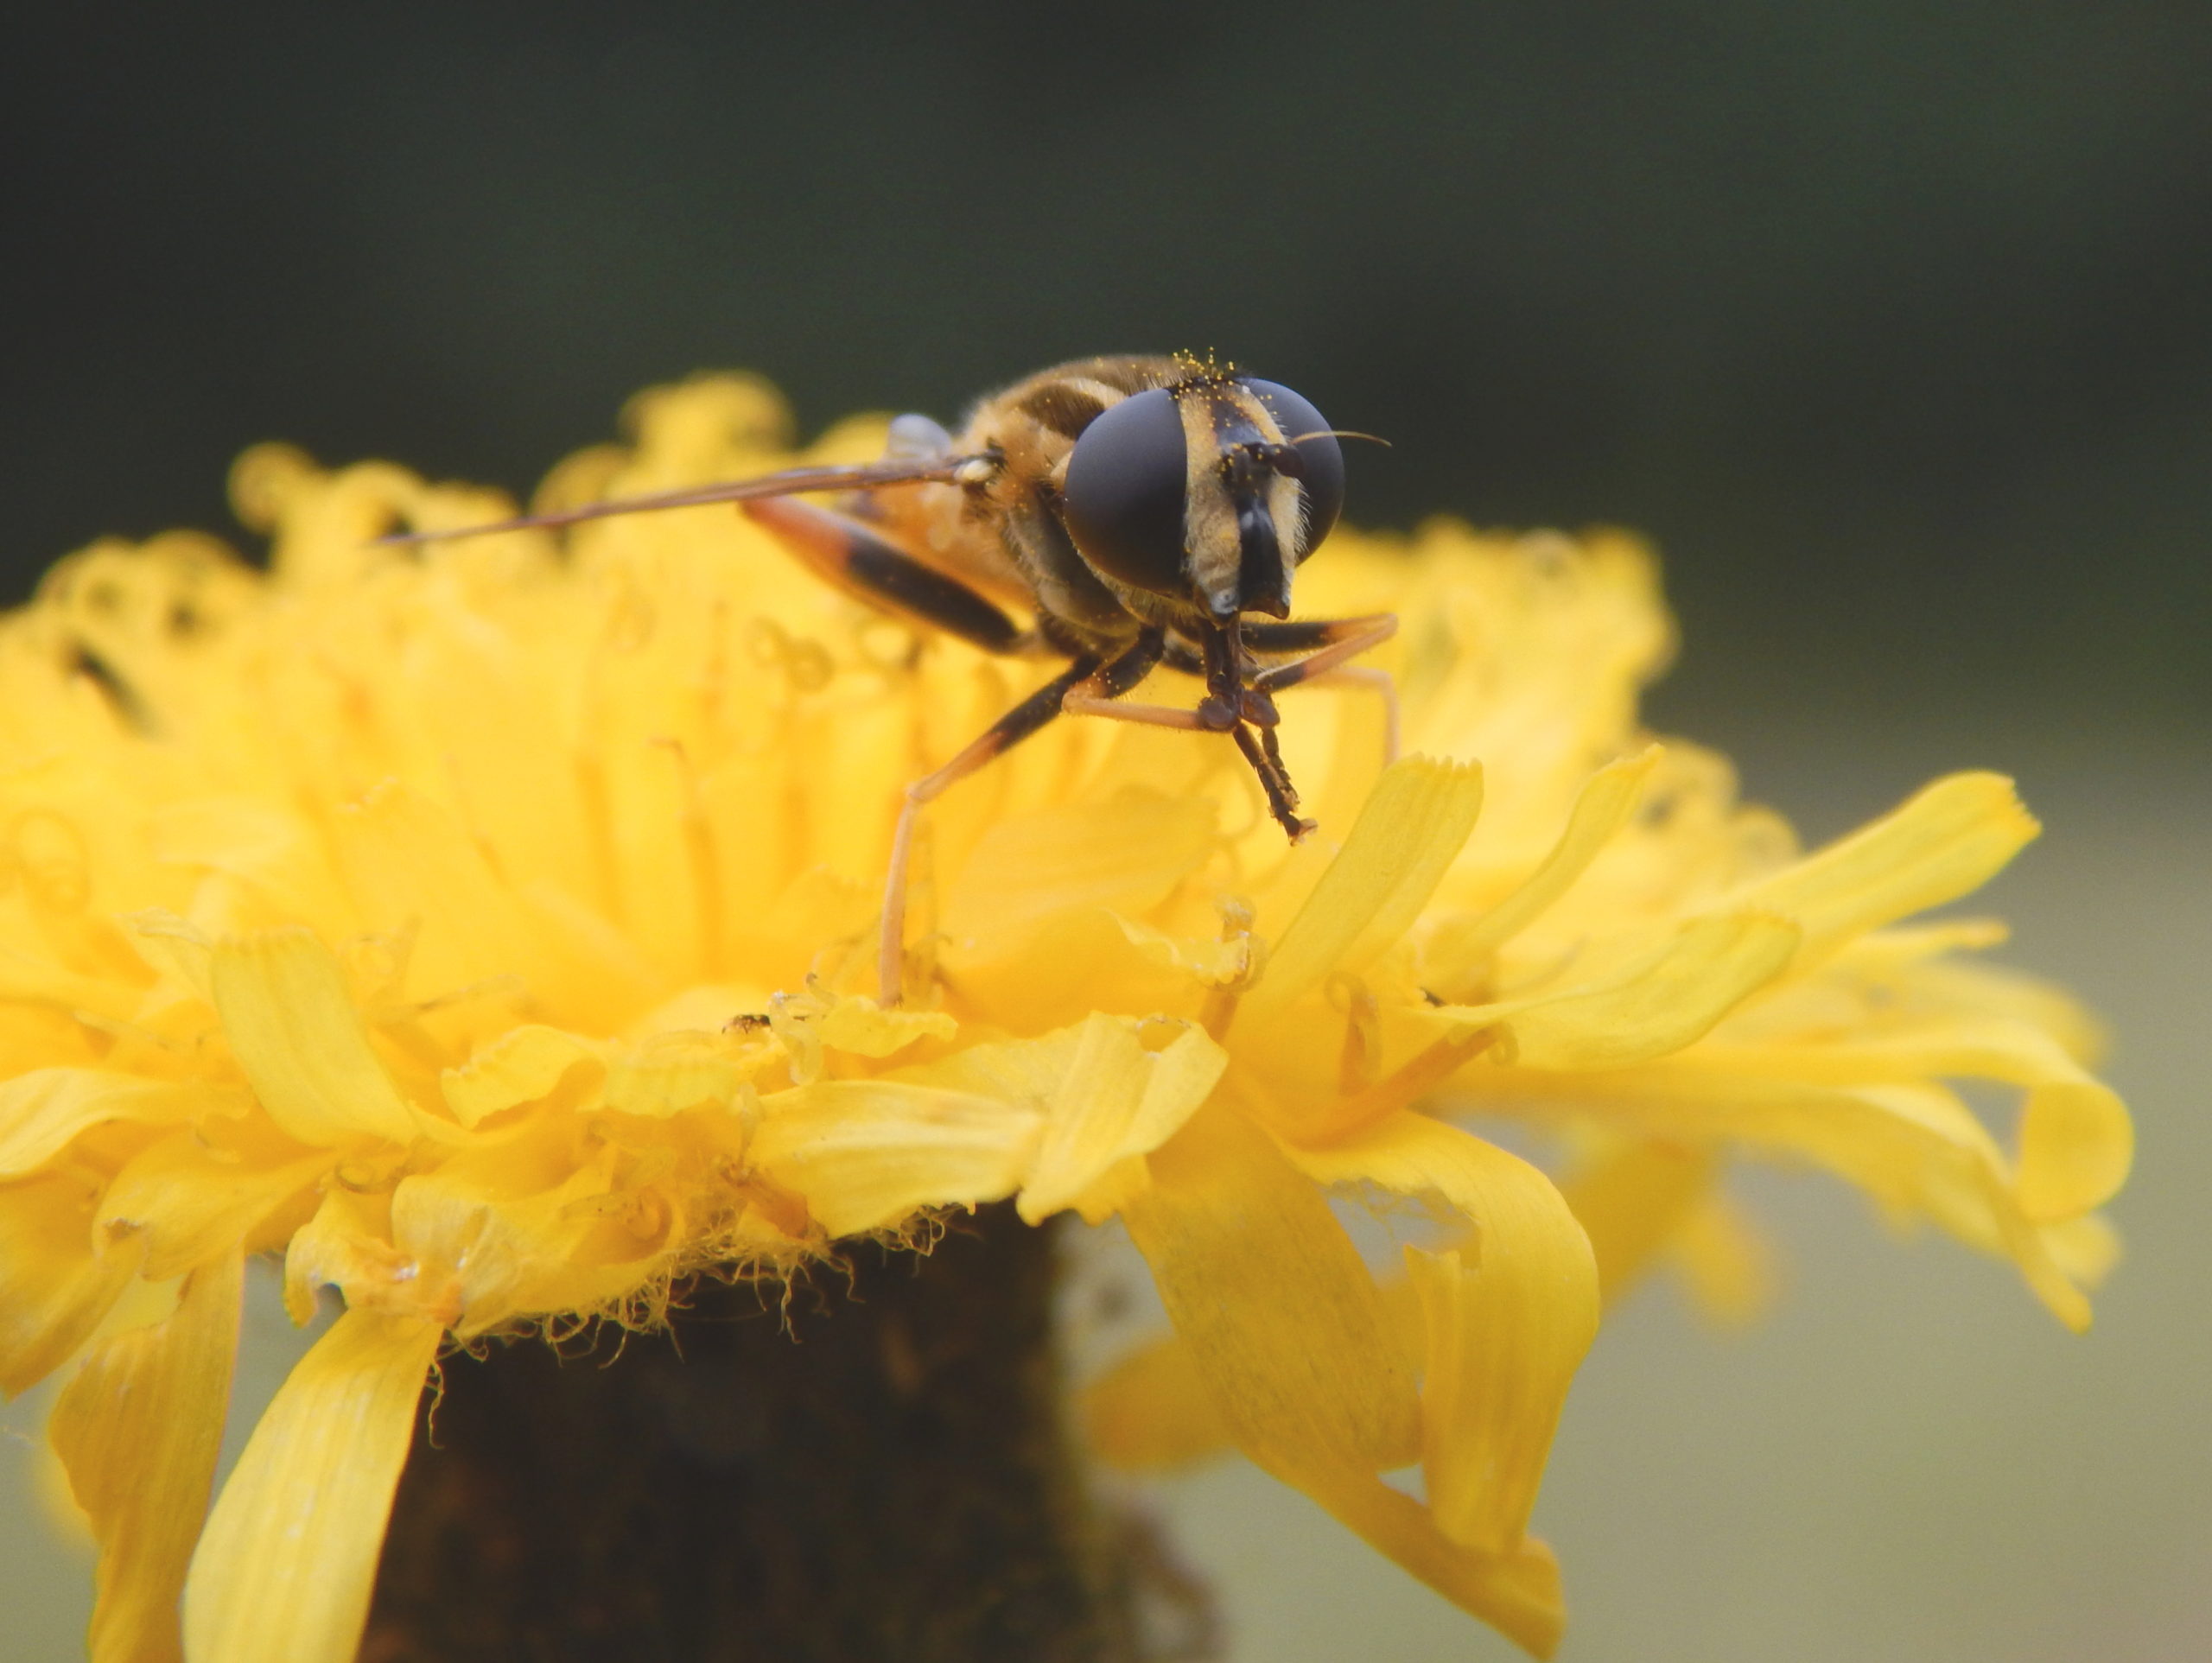 Hoverfly, Helophilus pendulus, on a yellow flower